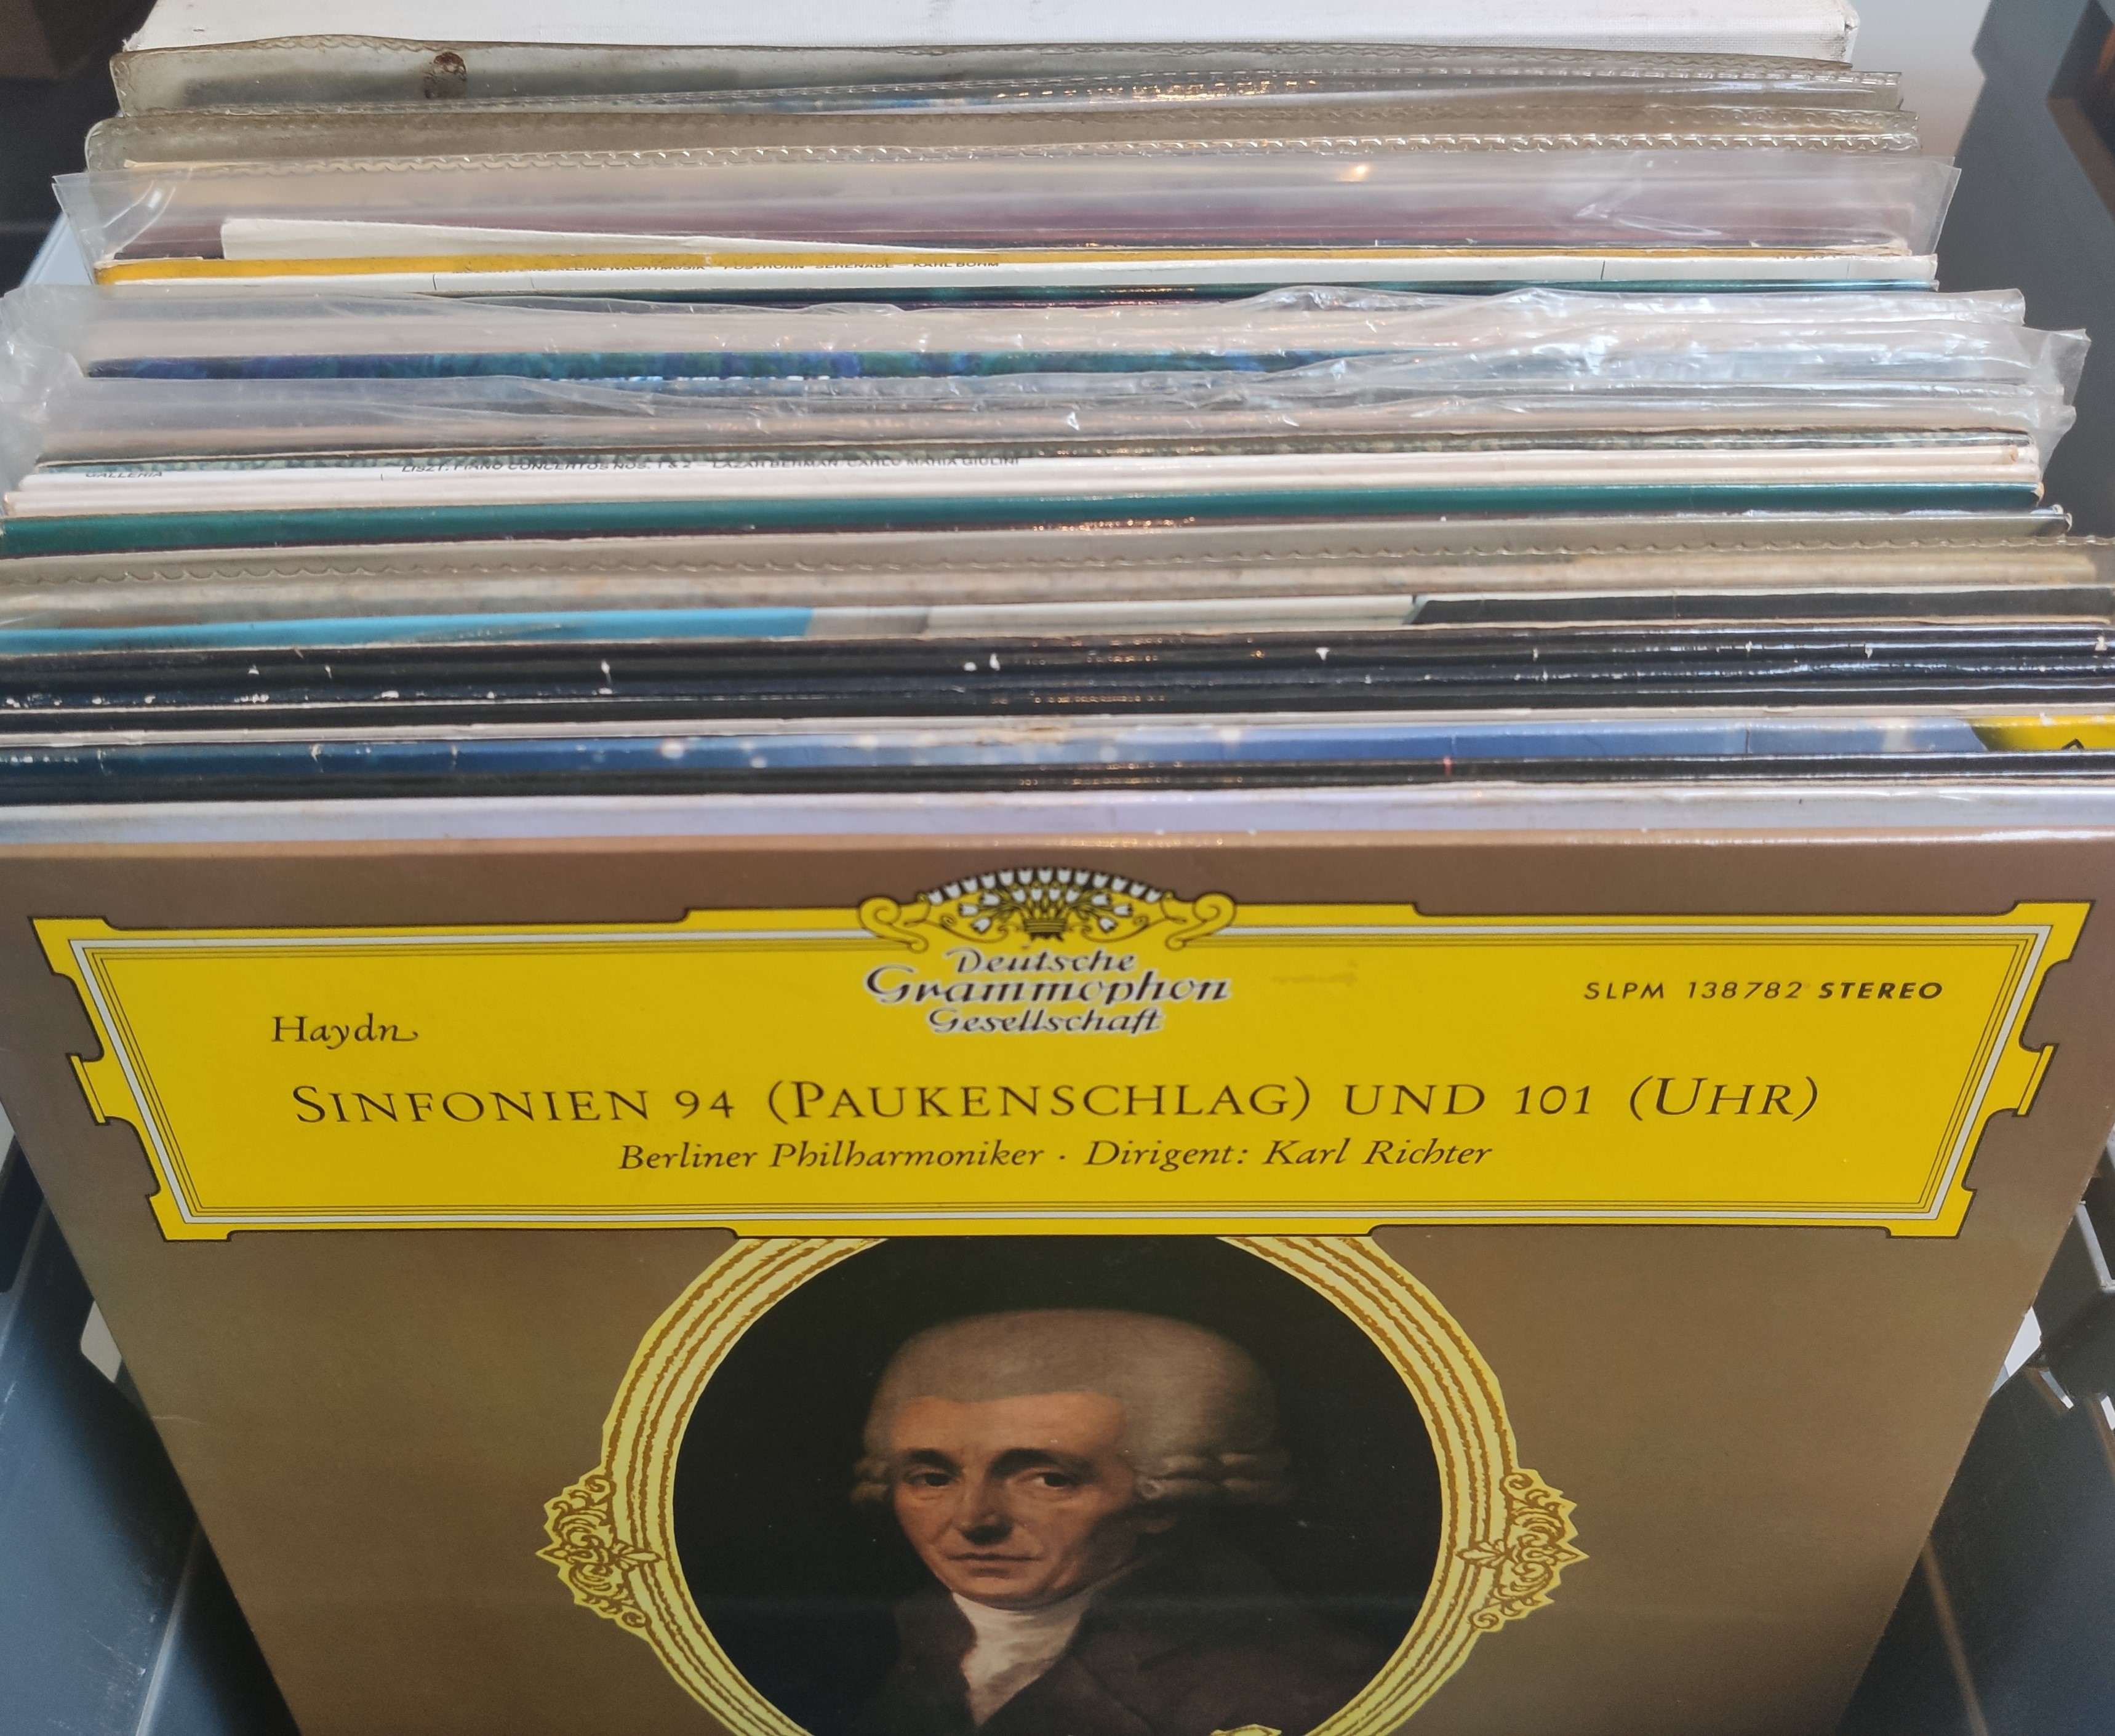 A Fantastic Collection of Deutsche Gramophone Classical Records. Digital and Stereo Etc. - Image 3 of 11